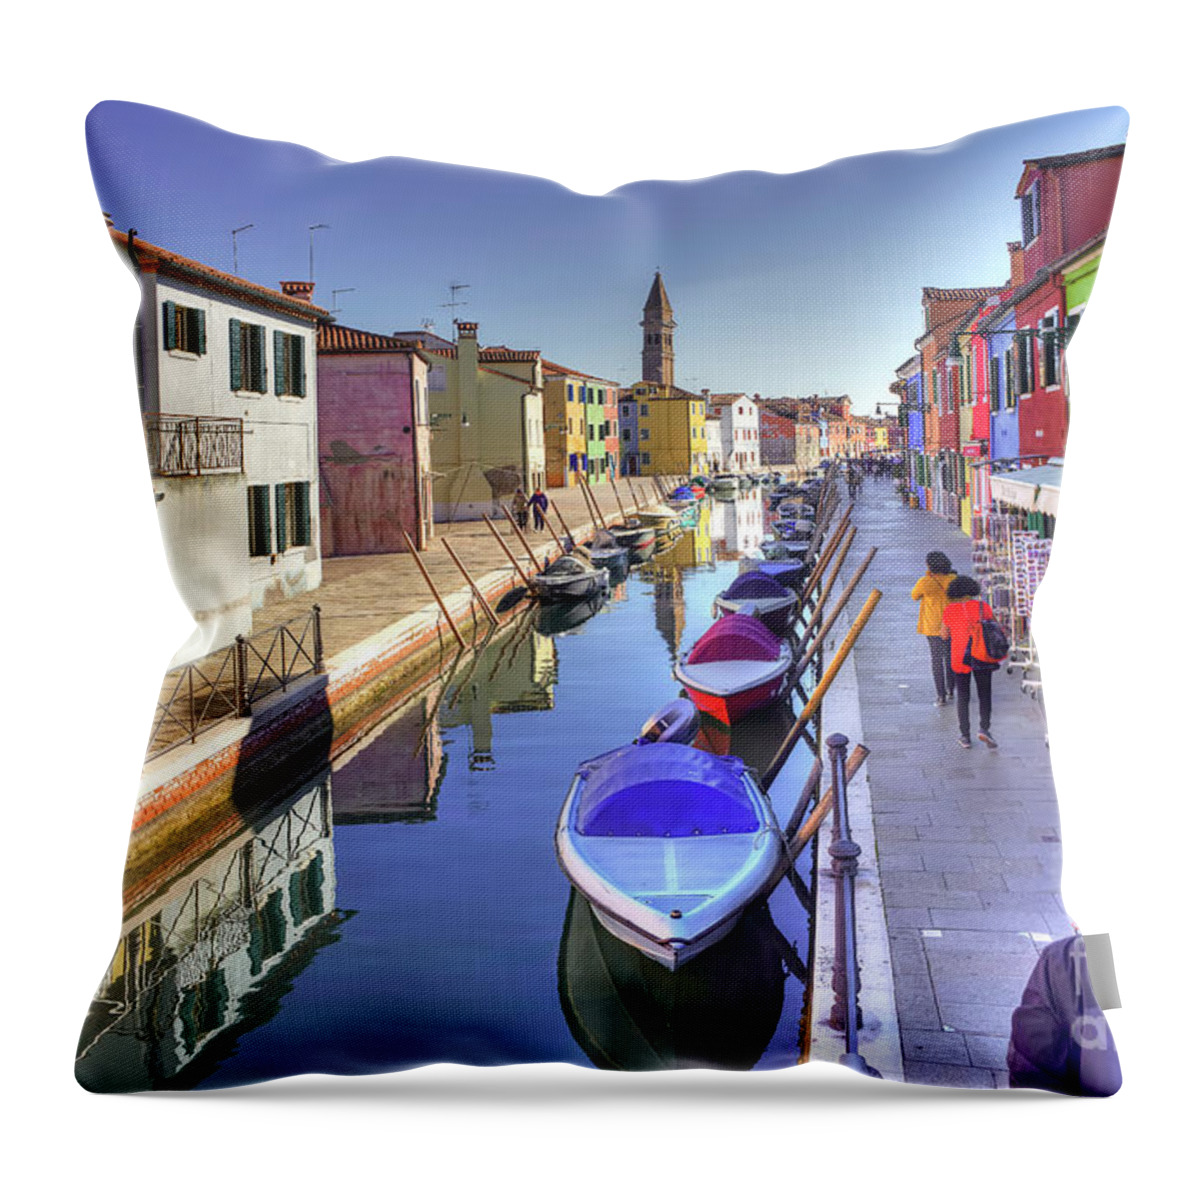 Italy Throw Pillow featuring the photograph Burano Canal - Italy by Paolo Signorini